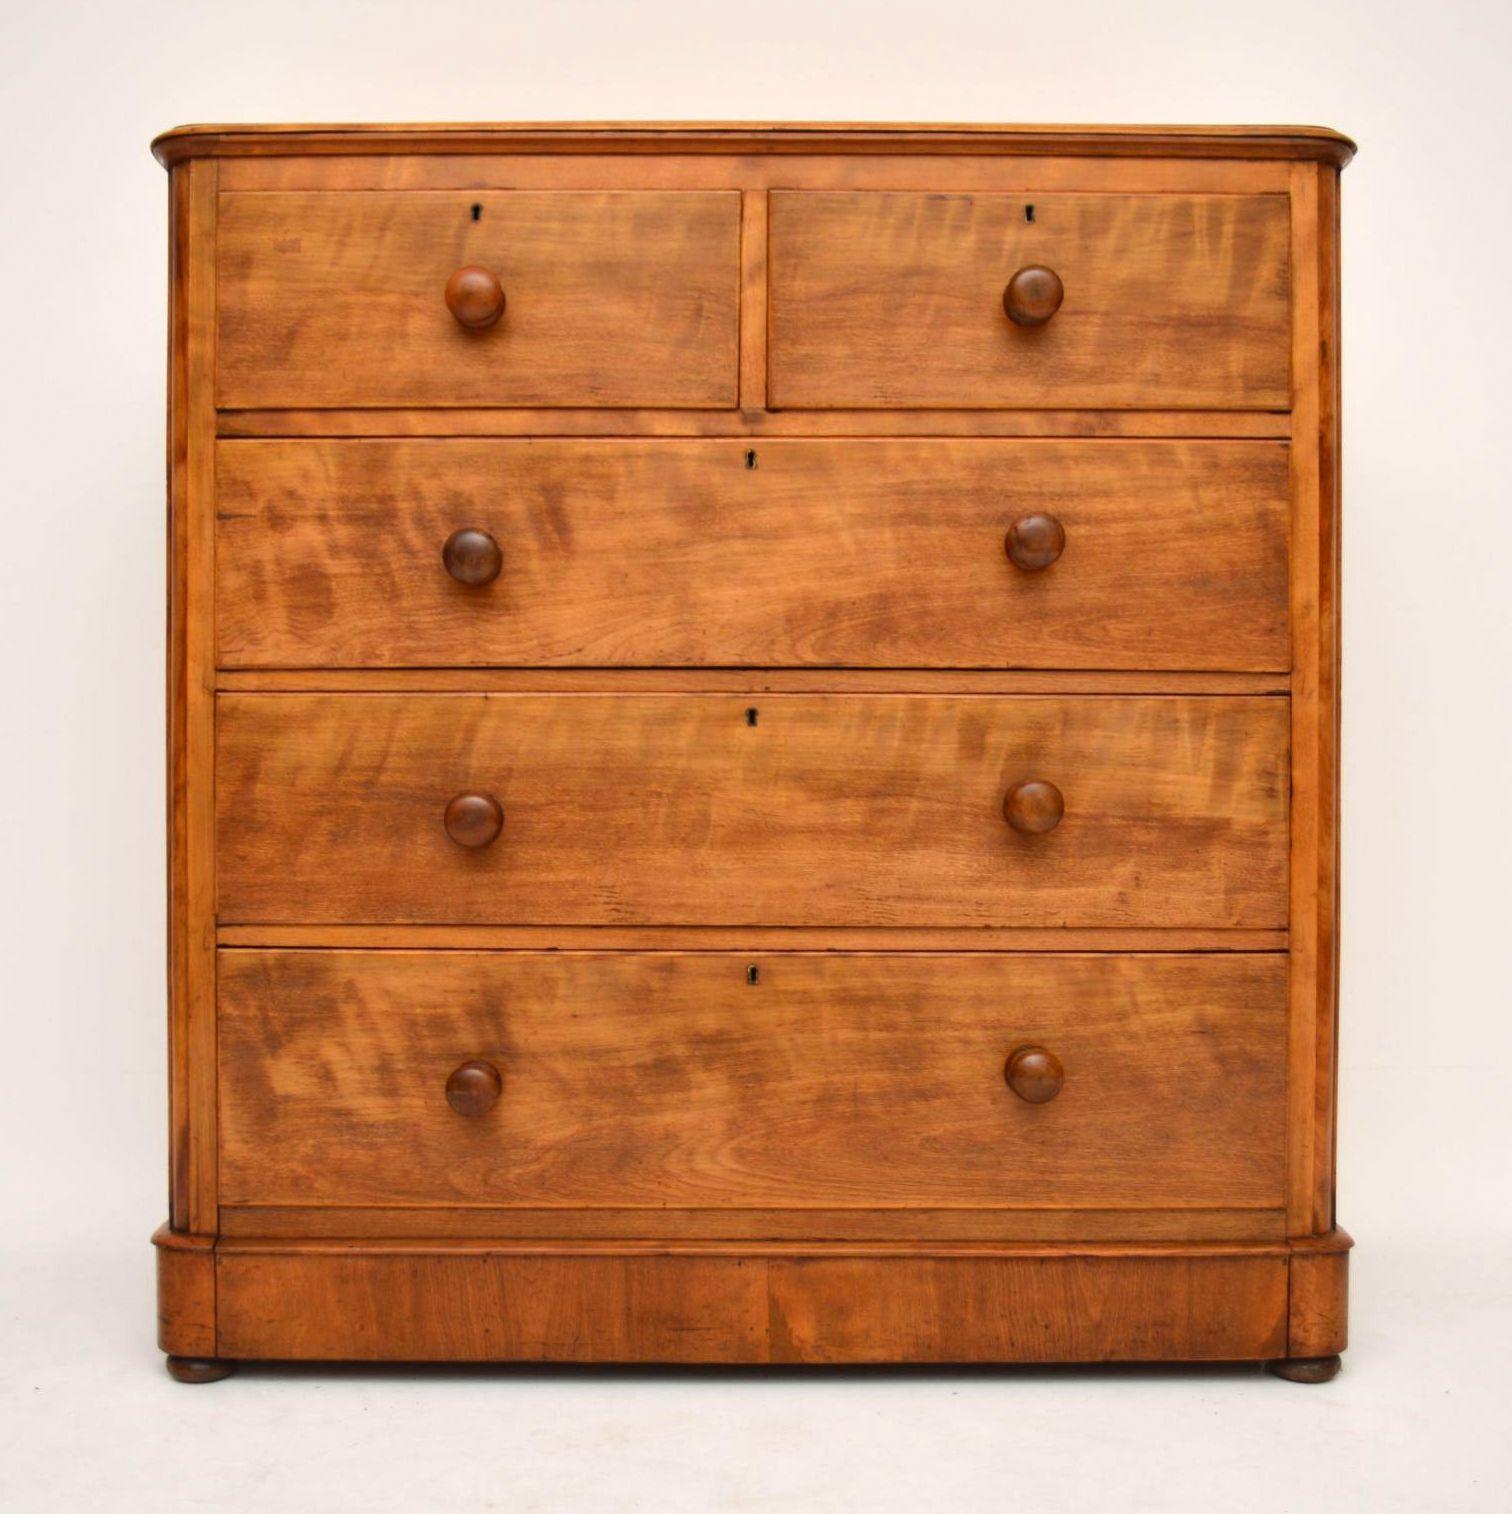 Large chunky antique Victorian chest of drawers in Satinwood with a lovely silky finish on the surface.

All the drawers are deep & graduated, while the bottom drawer is extra deep, because it is attached to the plinth. The drawers also have